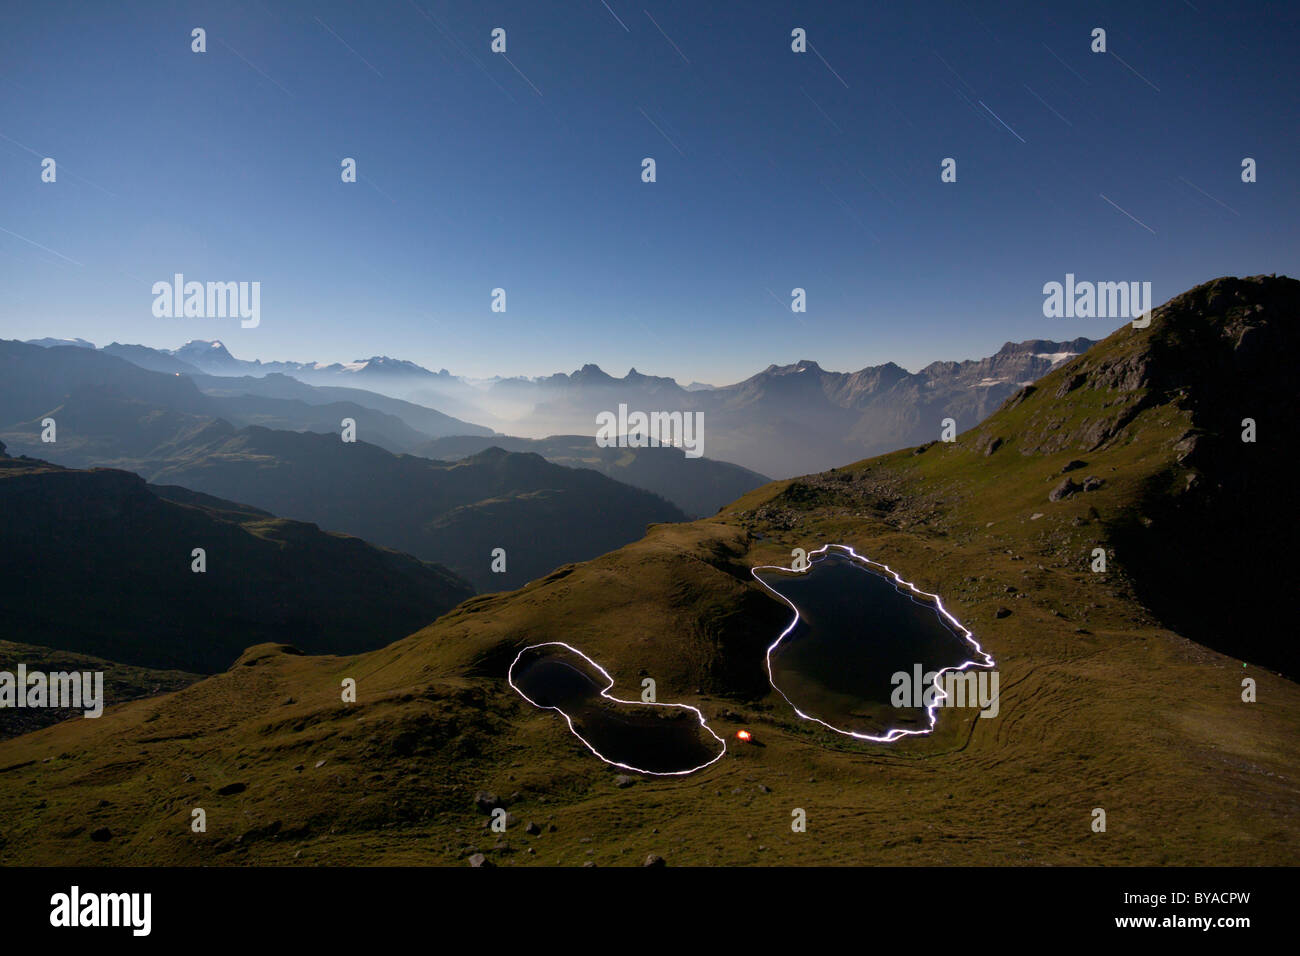 Night view, mountain view at full moon, the contours of the Berglimatt Lakes illuminated by hikers with flashlights Stock Photo